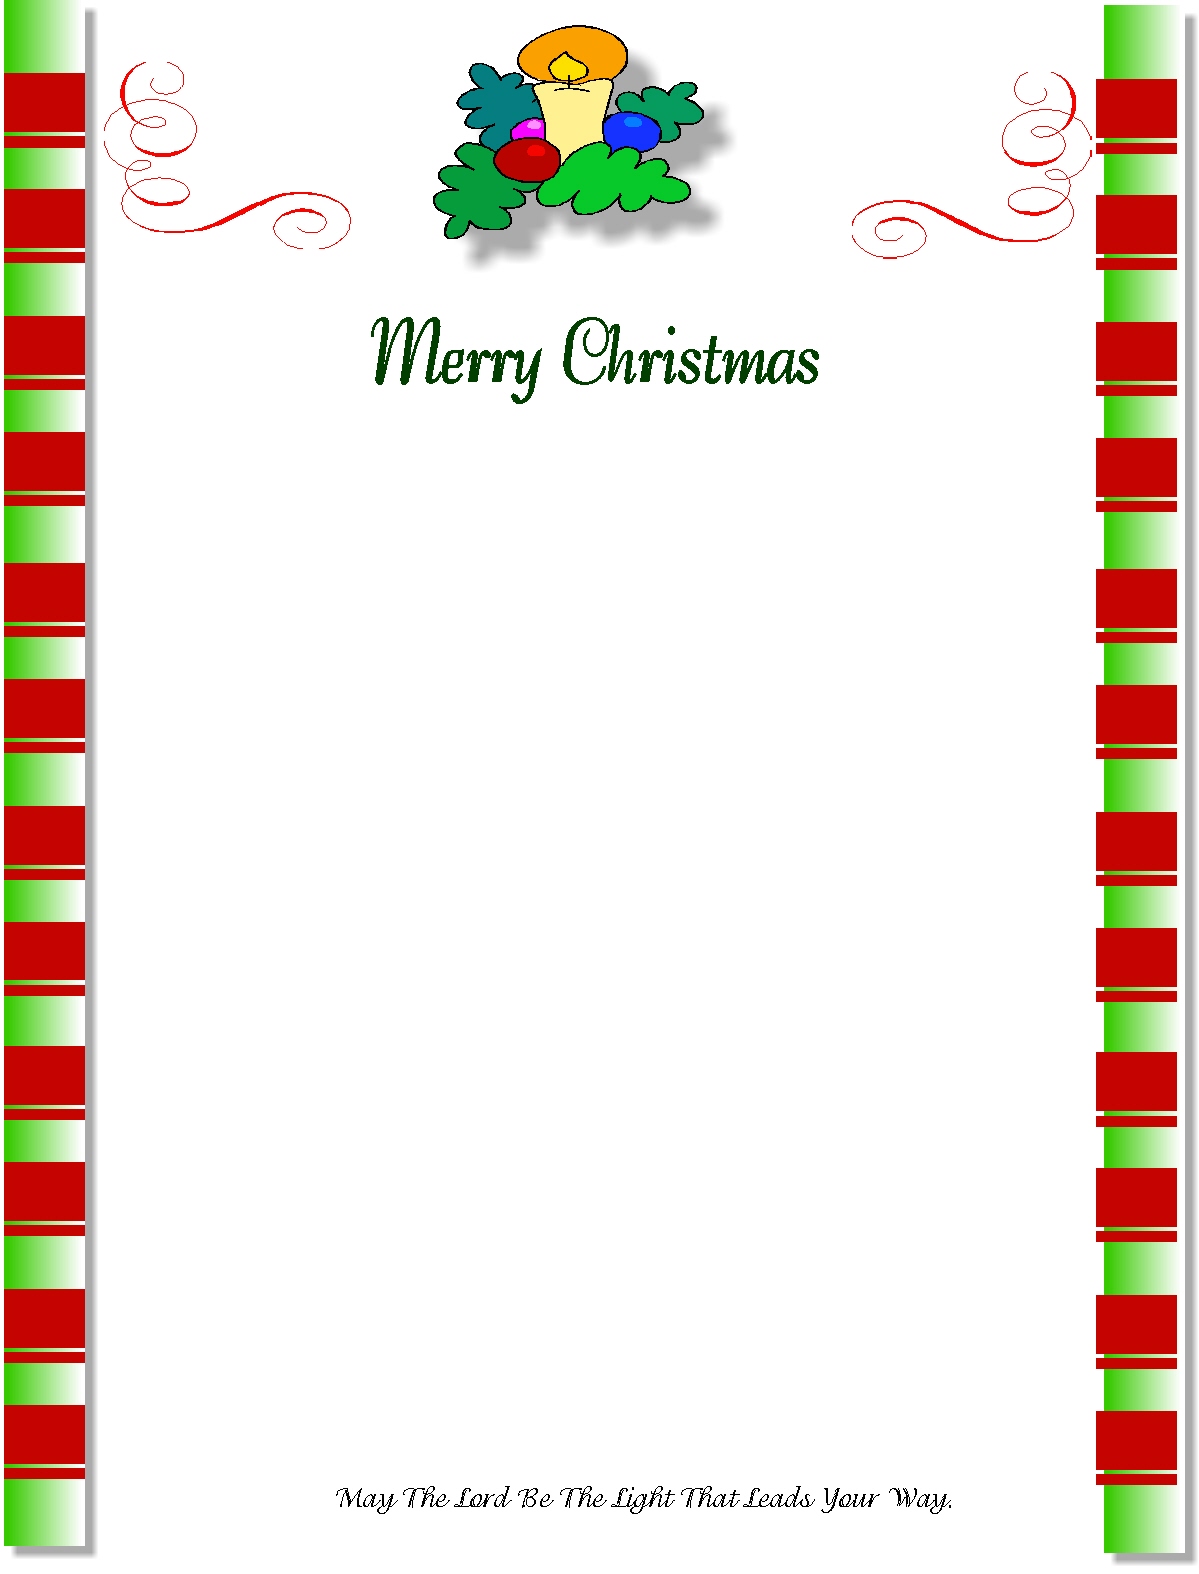 Christian Images In My Treasure Box: Christmas Letterheads And Envelopes